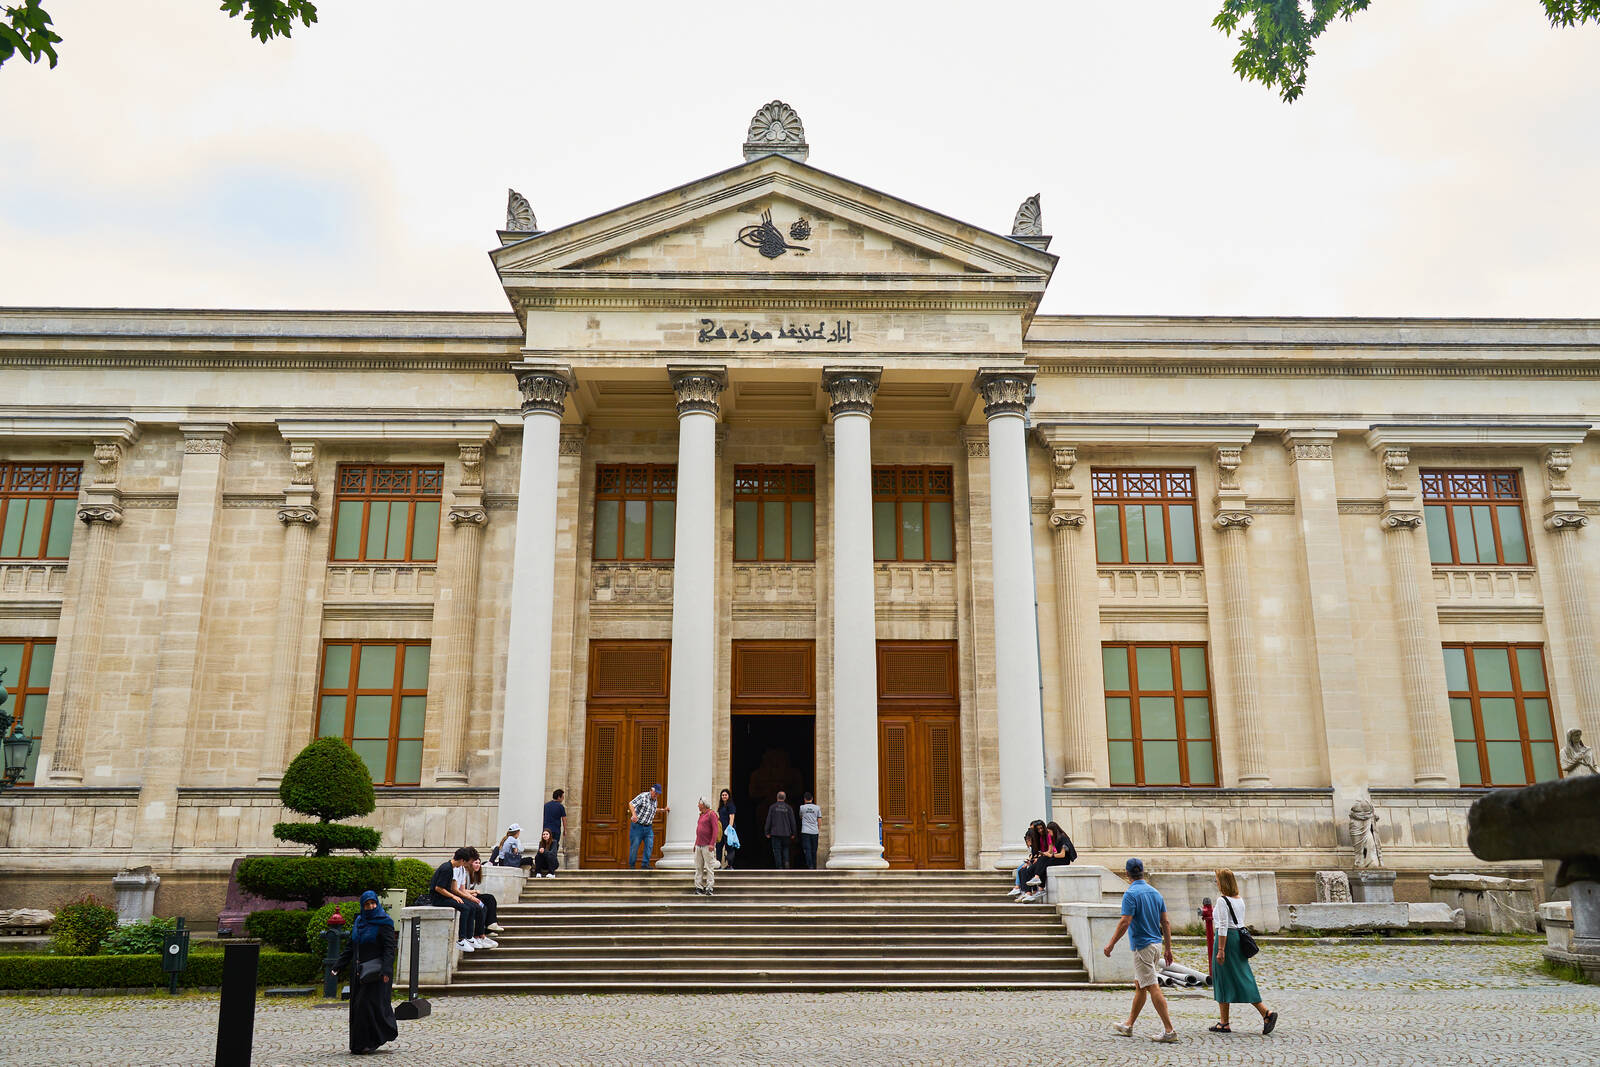 Image of Istanbul Archaeology Museums by Rostikslav Nepomnyaschiy